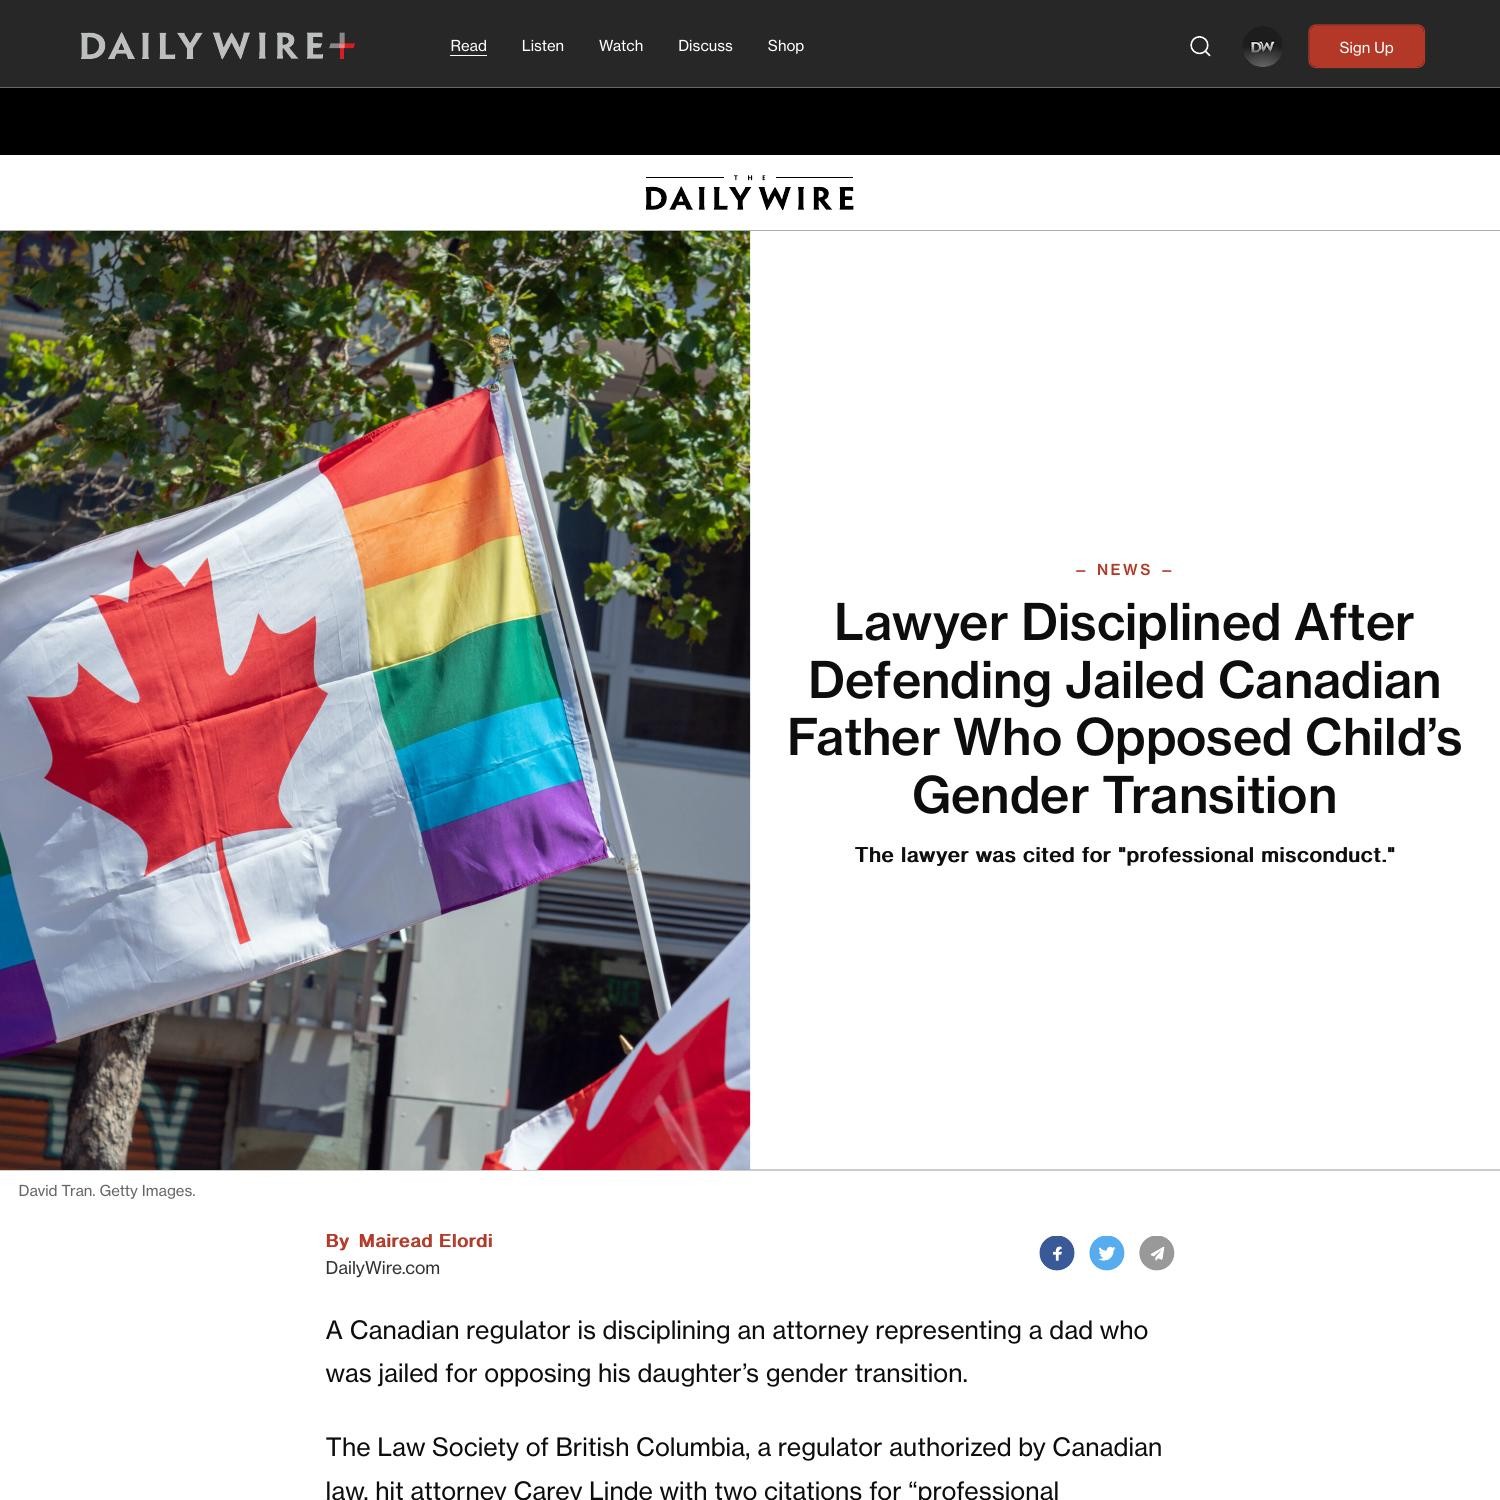 Lawyer Disciplined After Defending Jailed Canadian Father Who Opposed Child’s Gender Transition